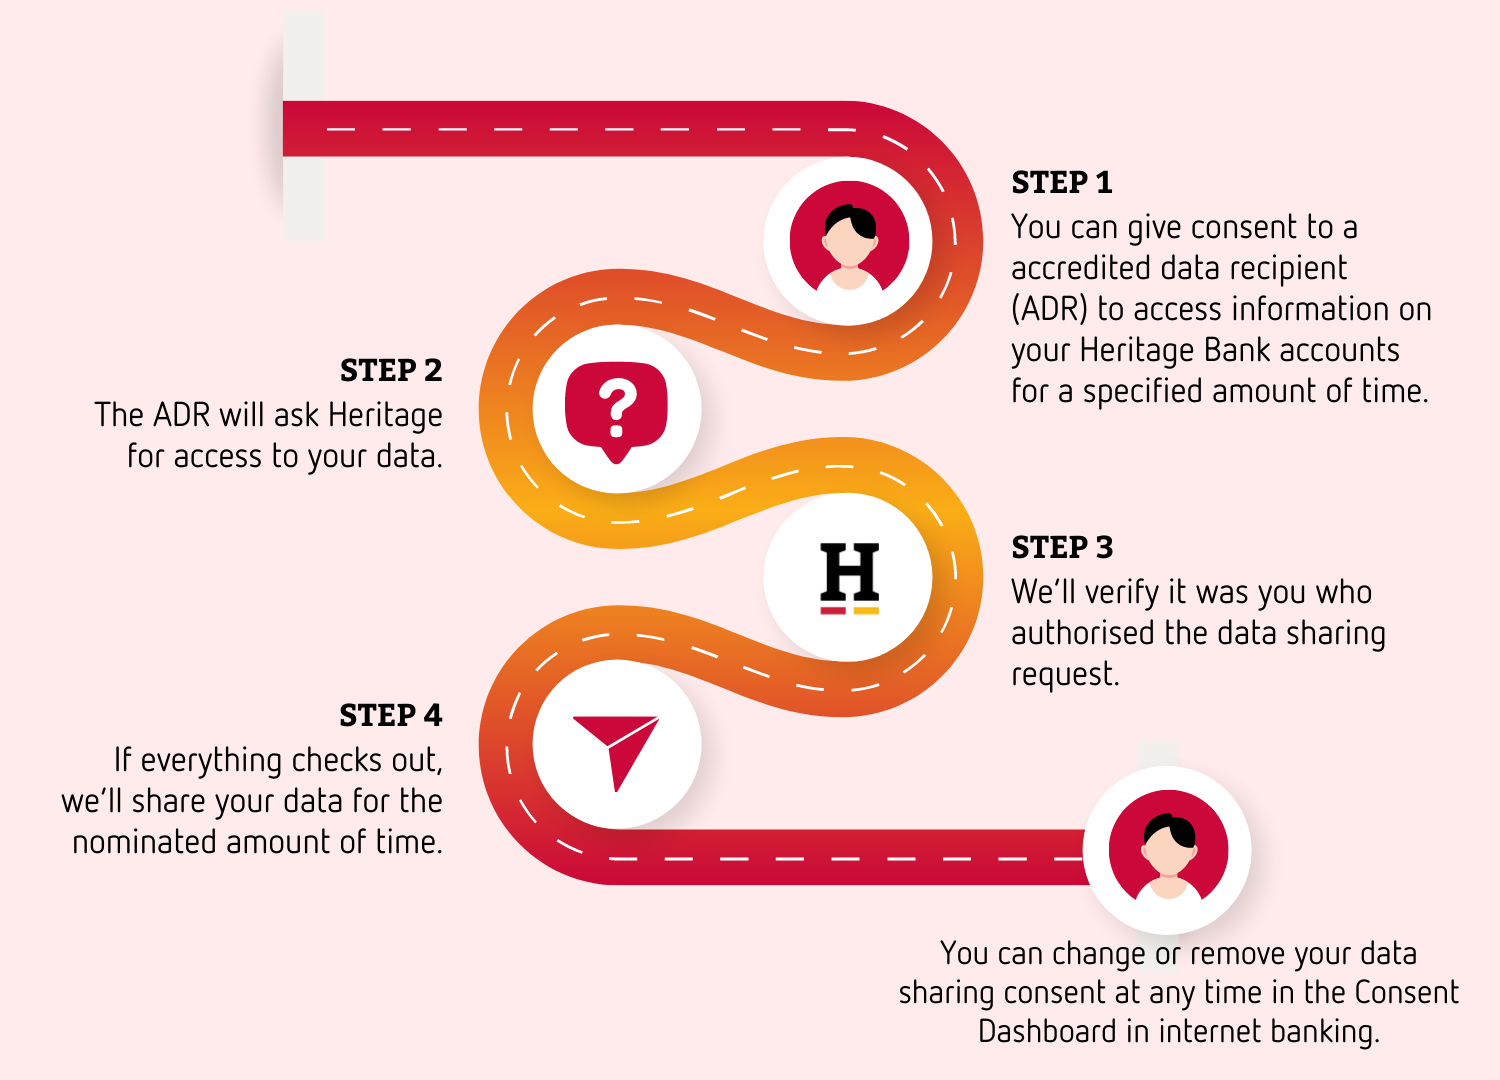 https://heritage.com.au/-/media/m/tools/infographics/saving/how-open-banking-works---heritage-bank.png?cx=0.5&cy=0.5&cw=1500&ch=1080&hash=877D95E34A6A0291CA89A992C7780BDCB3EB4A59